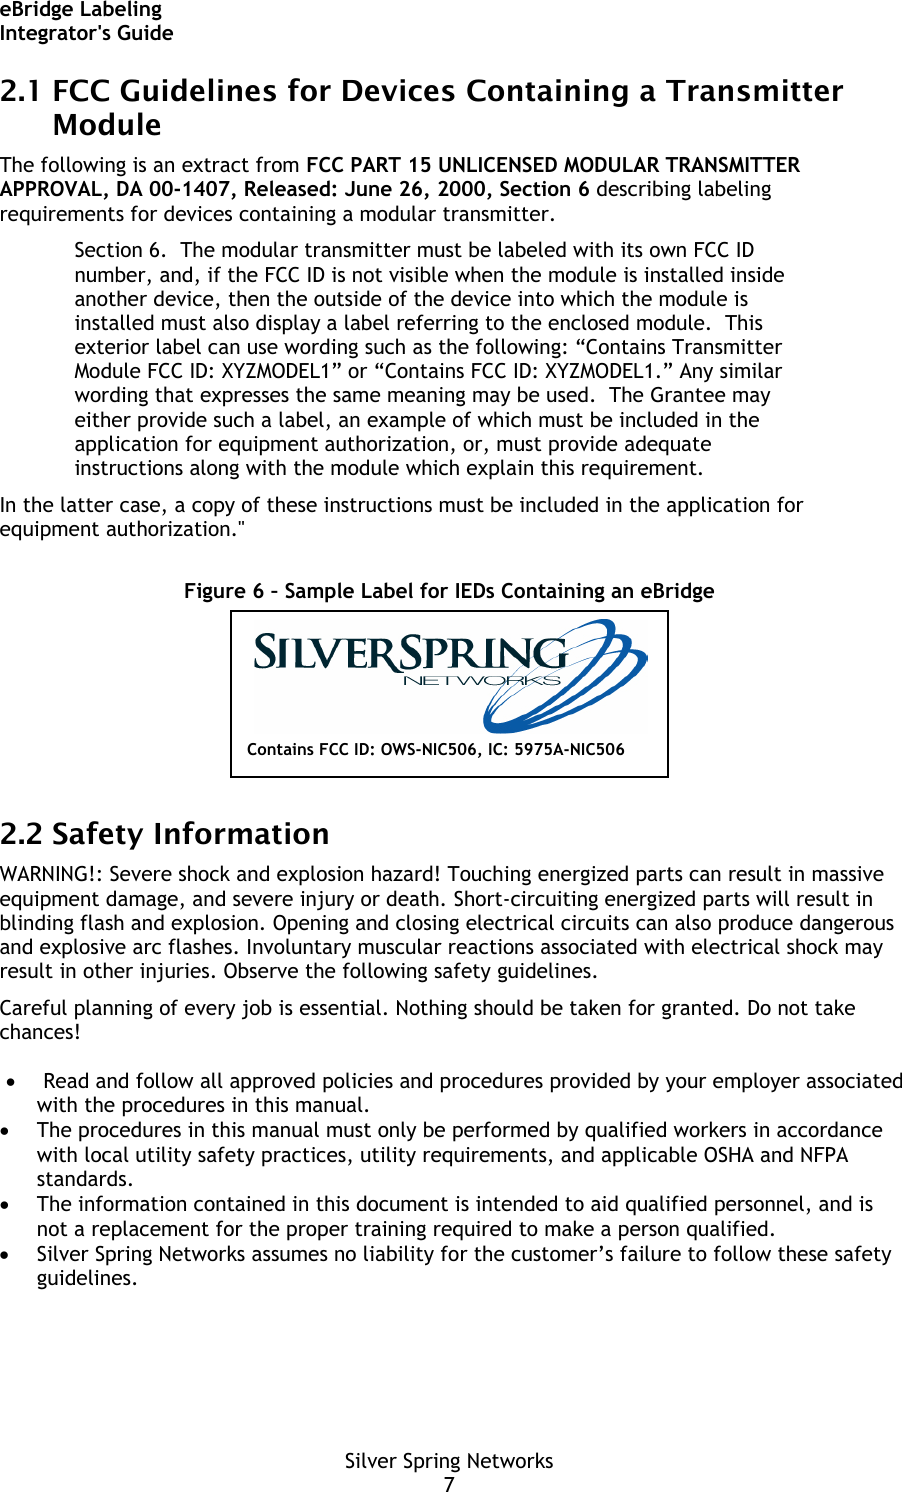 eBridge Labeling Integrator&apos;s Guide Silver Spring Networks 7 2.1 FCC Guidelines for Devices Containing a Transmitter Module The following is an extract from FCC PART 15 UNLICENSED MODULAR TRANSMITTER APPROVAL, DA 00-1407, Released: June 26, 2000, Section 6 describing labeling requirements for devices containing a modular transmitter. Section 6.  The modular transmitter must be labeled with its own FCC ID number, and, if the FCC ID is not visible when the module is installed inside another device, then the outside of the device into which the module is installed must also display a label referring to the enclosed module.  This exterior label can use wording such as the following: “Contains Transmitter Module FCC ID: XYZMODEL1” or “Contains FCC ID: XYZMODEL1.” Any similar wording that expresses the same meaning may be used.  The Grantee may either provide such a label, an example of which must be included in the application for equipment authorization, or, must provide adequate instructions along with the module which explain this requirement.  In the latter case, a copy of these instructions must be included in the application for equipment authorization.&quot;  Figure 6 – Sample Label for IEDs Containing an eBridge  2.2 Safety Information WARNING!: Severe shock and explosion hazard! Touching energized parts can result in massive equipment damage, and severe injury or death. Short-circuiting energized parts will result in blinding flash and explosion. Opening and closing electrical circuits can also produce dangerous and explosive arc flashes. Involuntary muscular reactions associated with electrical shock may result in other injuries. Observe the following safety guidelines. Careful planning of every job is essential. Nothing should be taken for granted. Do not take chances!   • Read and follow all approved policies and procedures provided by your employer associated with the procedures in this manual. • The procedures in this manual must only be performed by qualified workers in accordance with local utility safety practices, utility requirements, and applicable OSHA and NFPA standards. • The information contained in this document is intended to aid qualified personnel, and is not a replacement for the proper training required to make a person qualified. • Silver Spring Networks assumes no liability for the customer’s failure to follow these safety guidelines. Contains FCC ID: OWS-NIC506, IC: 5975A-NIC506 